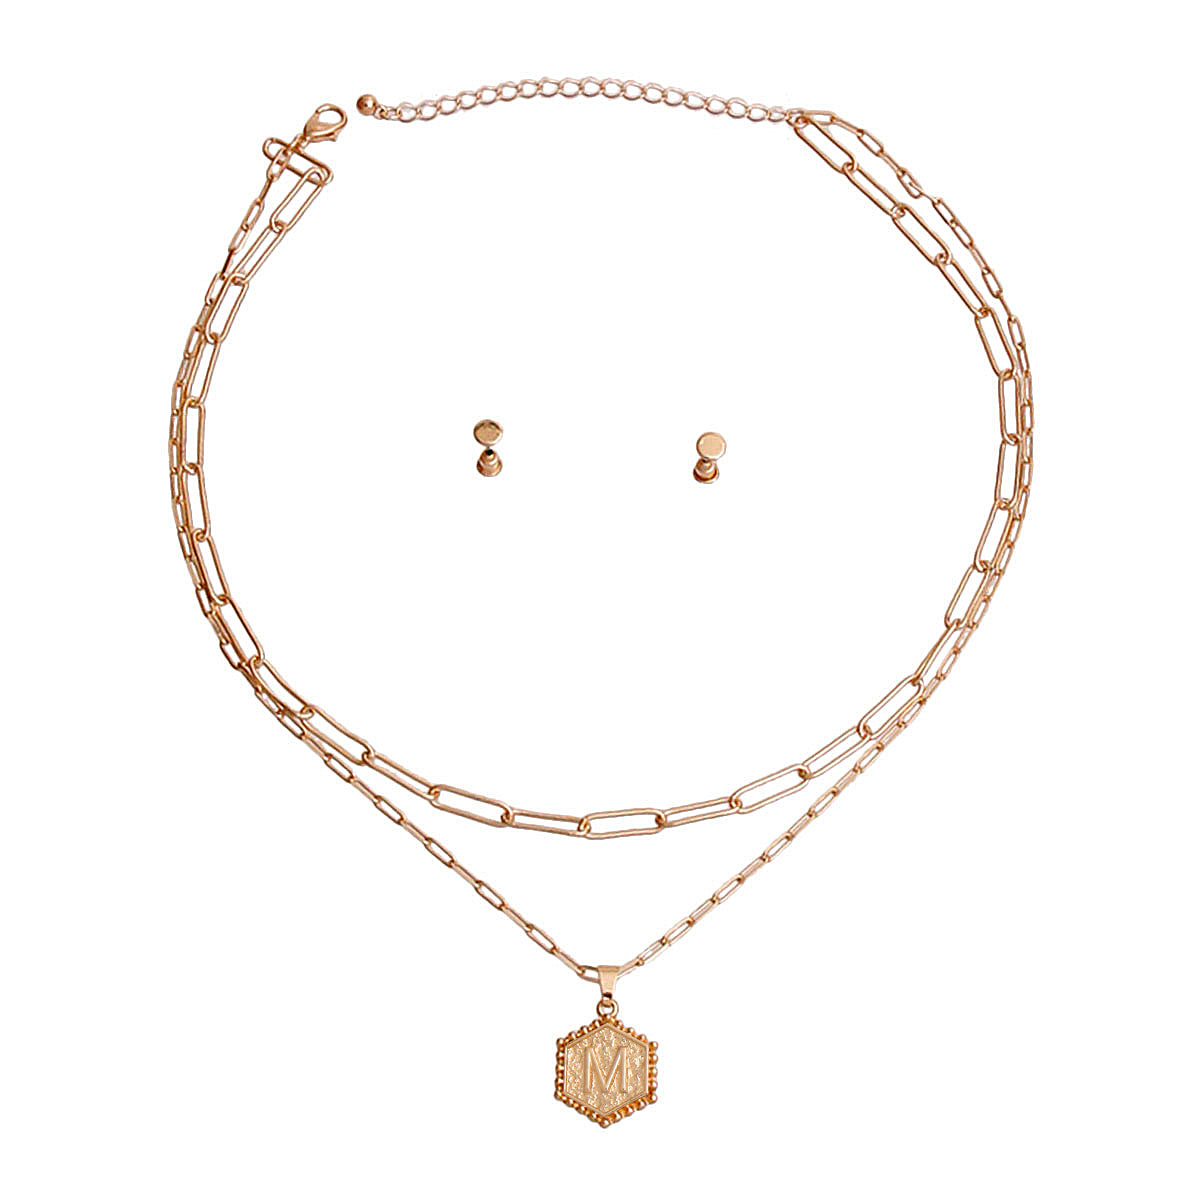 M Hexagon Initial Charm Necklace